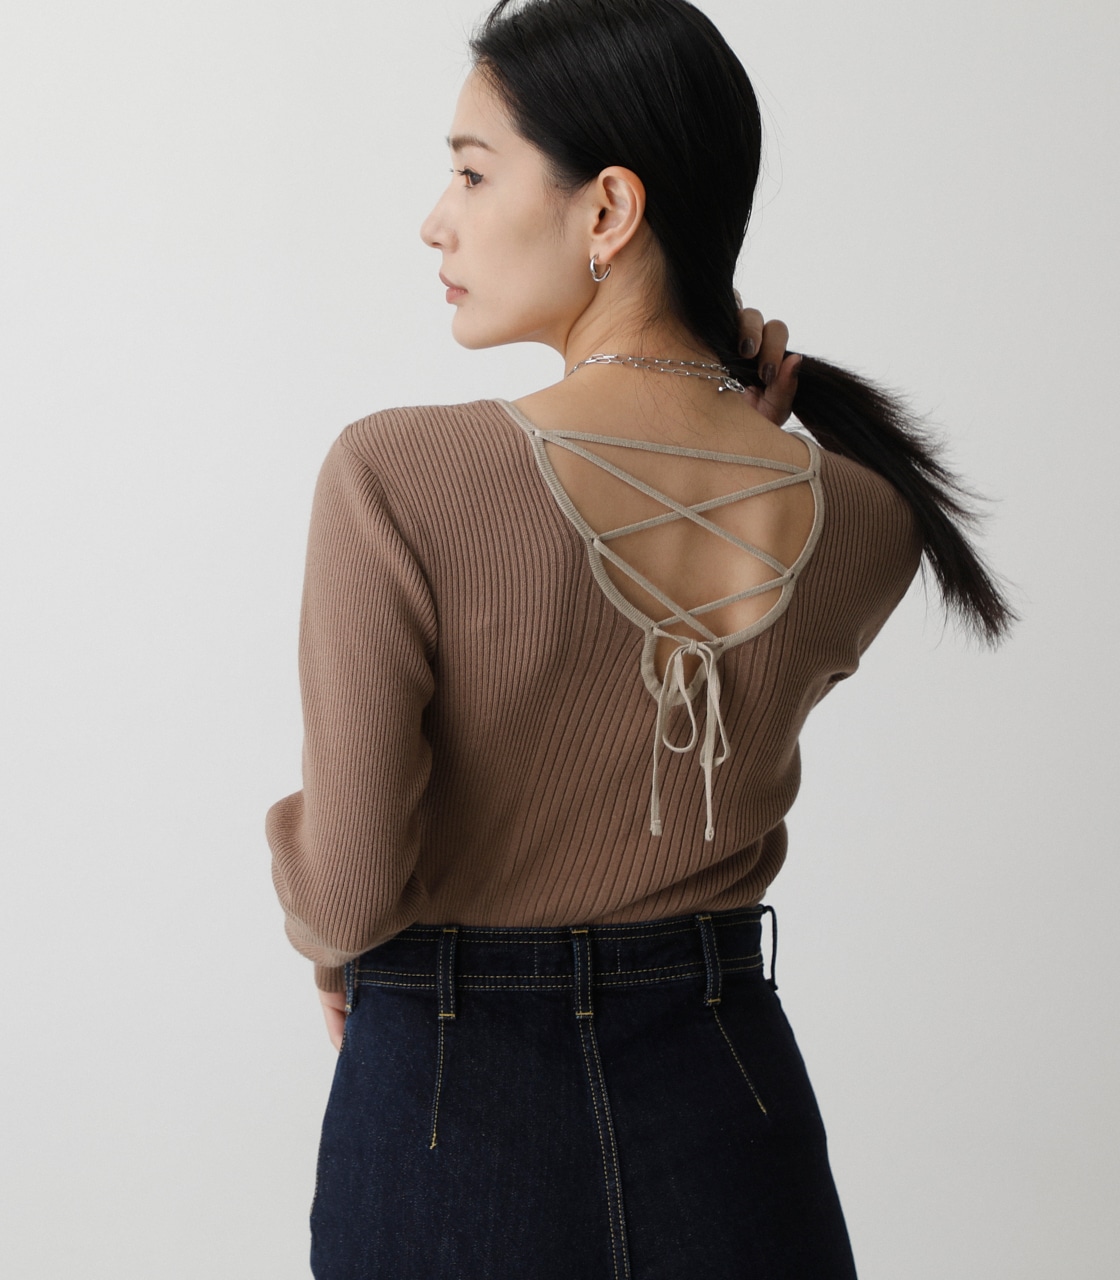 BACK LACE-UP KNIT TOPS/バックレースアップニットトップス 詳細画像 L/BRN 2